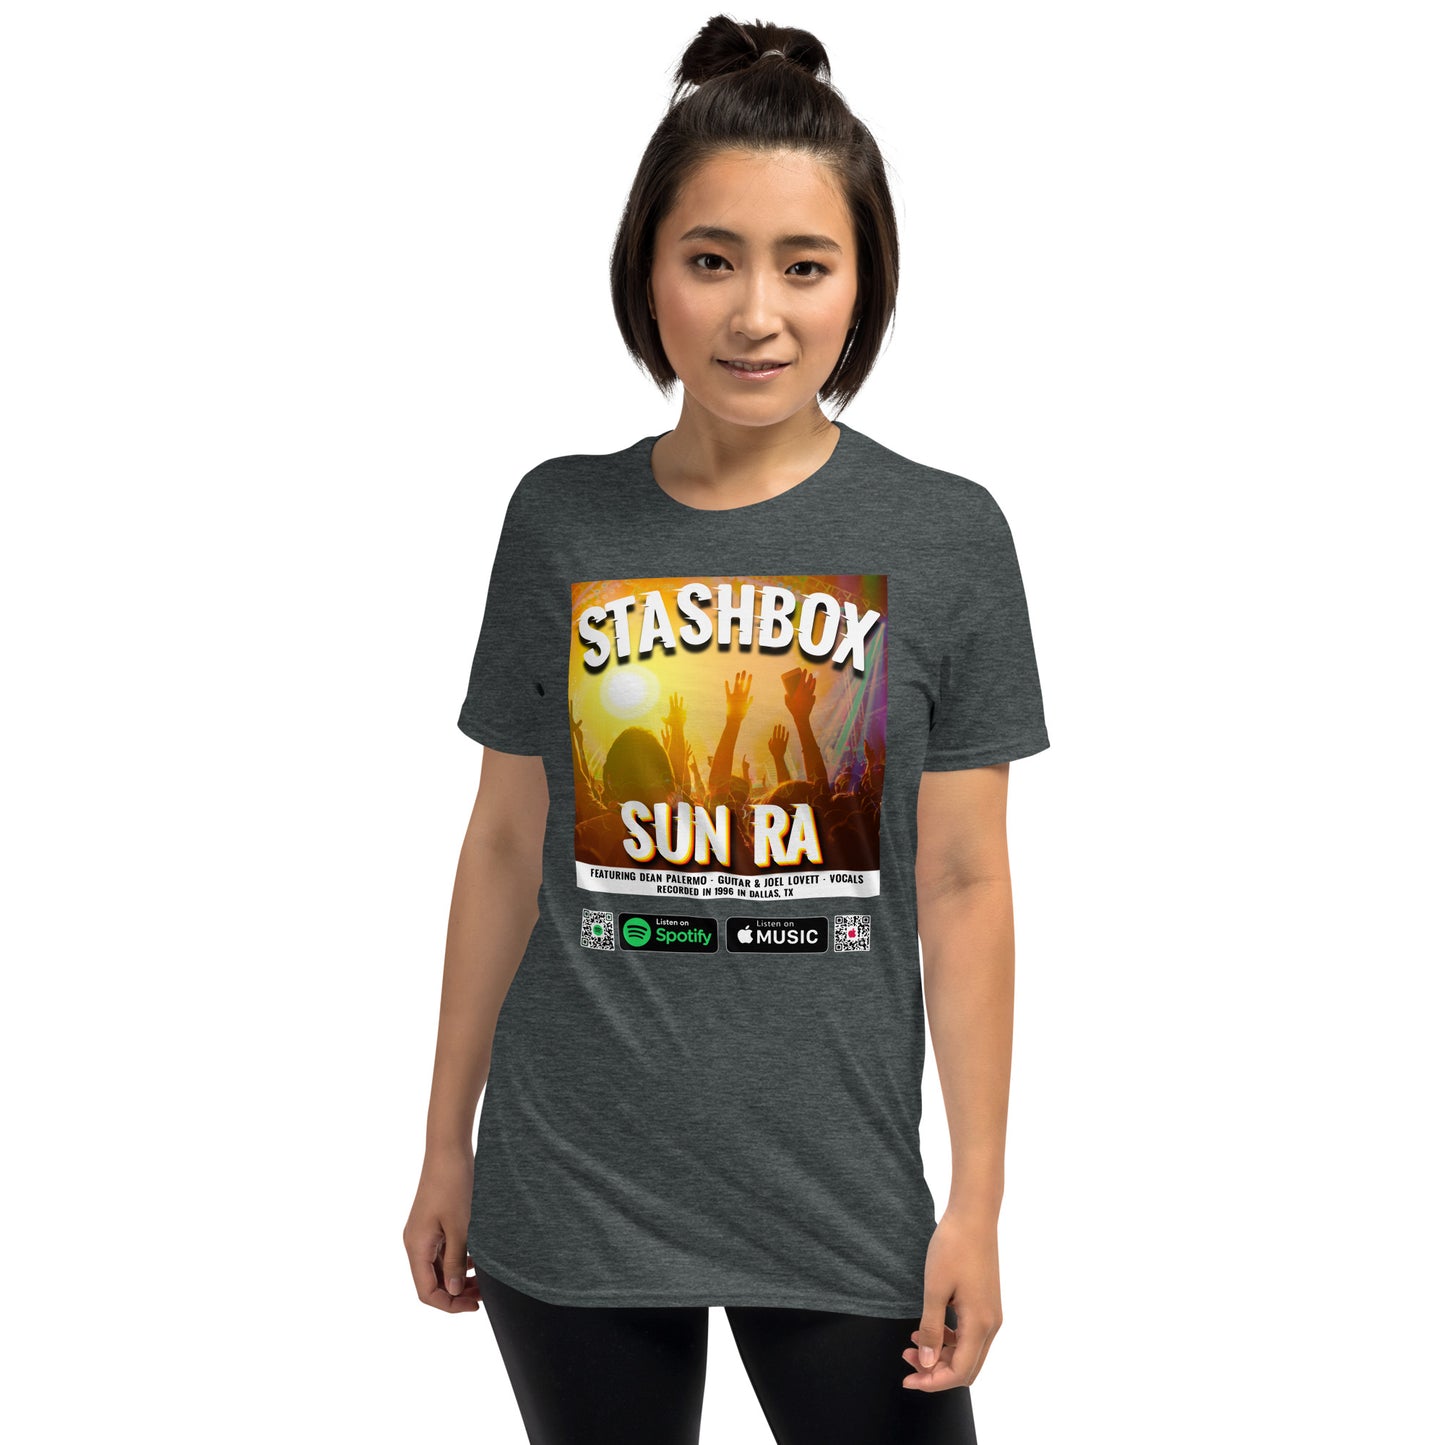 Sun Ra Cosmic Vibes: Design #026 Unisex Tee by Stashbox. Step into the intergalactic realm of Sun Ra with our unique tribute tee. Featuring the jazz legend's essence, this shirt is a statement of artistic expression. #SunRaInspired #CosmicJazzMagic #StashboxDesign